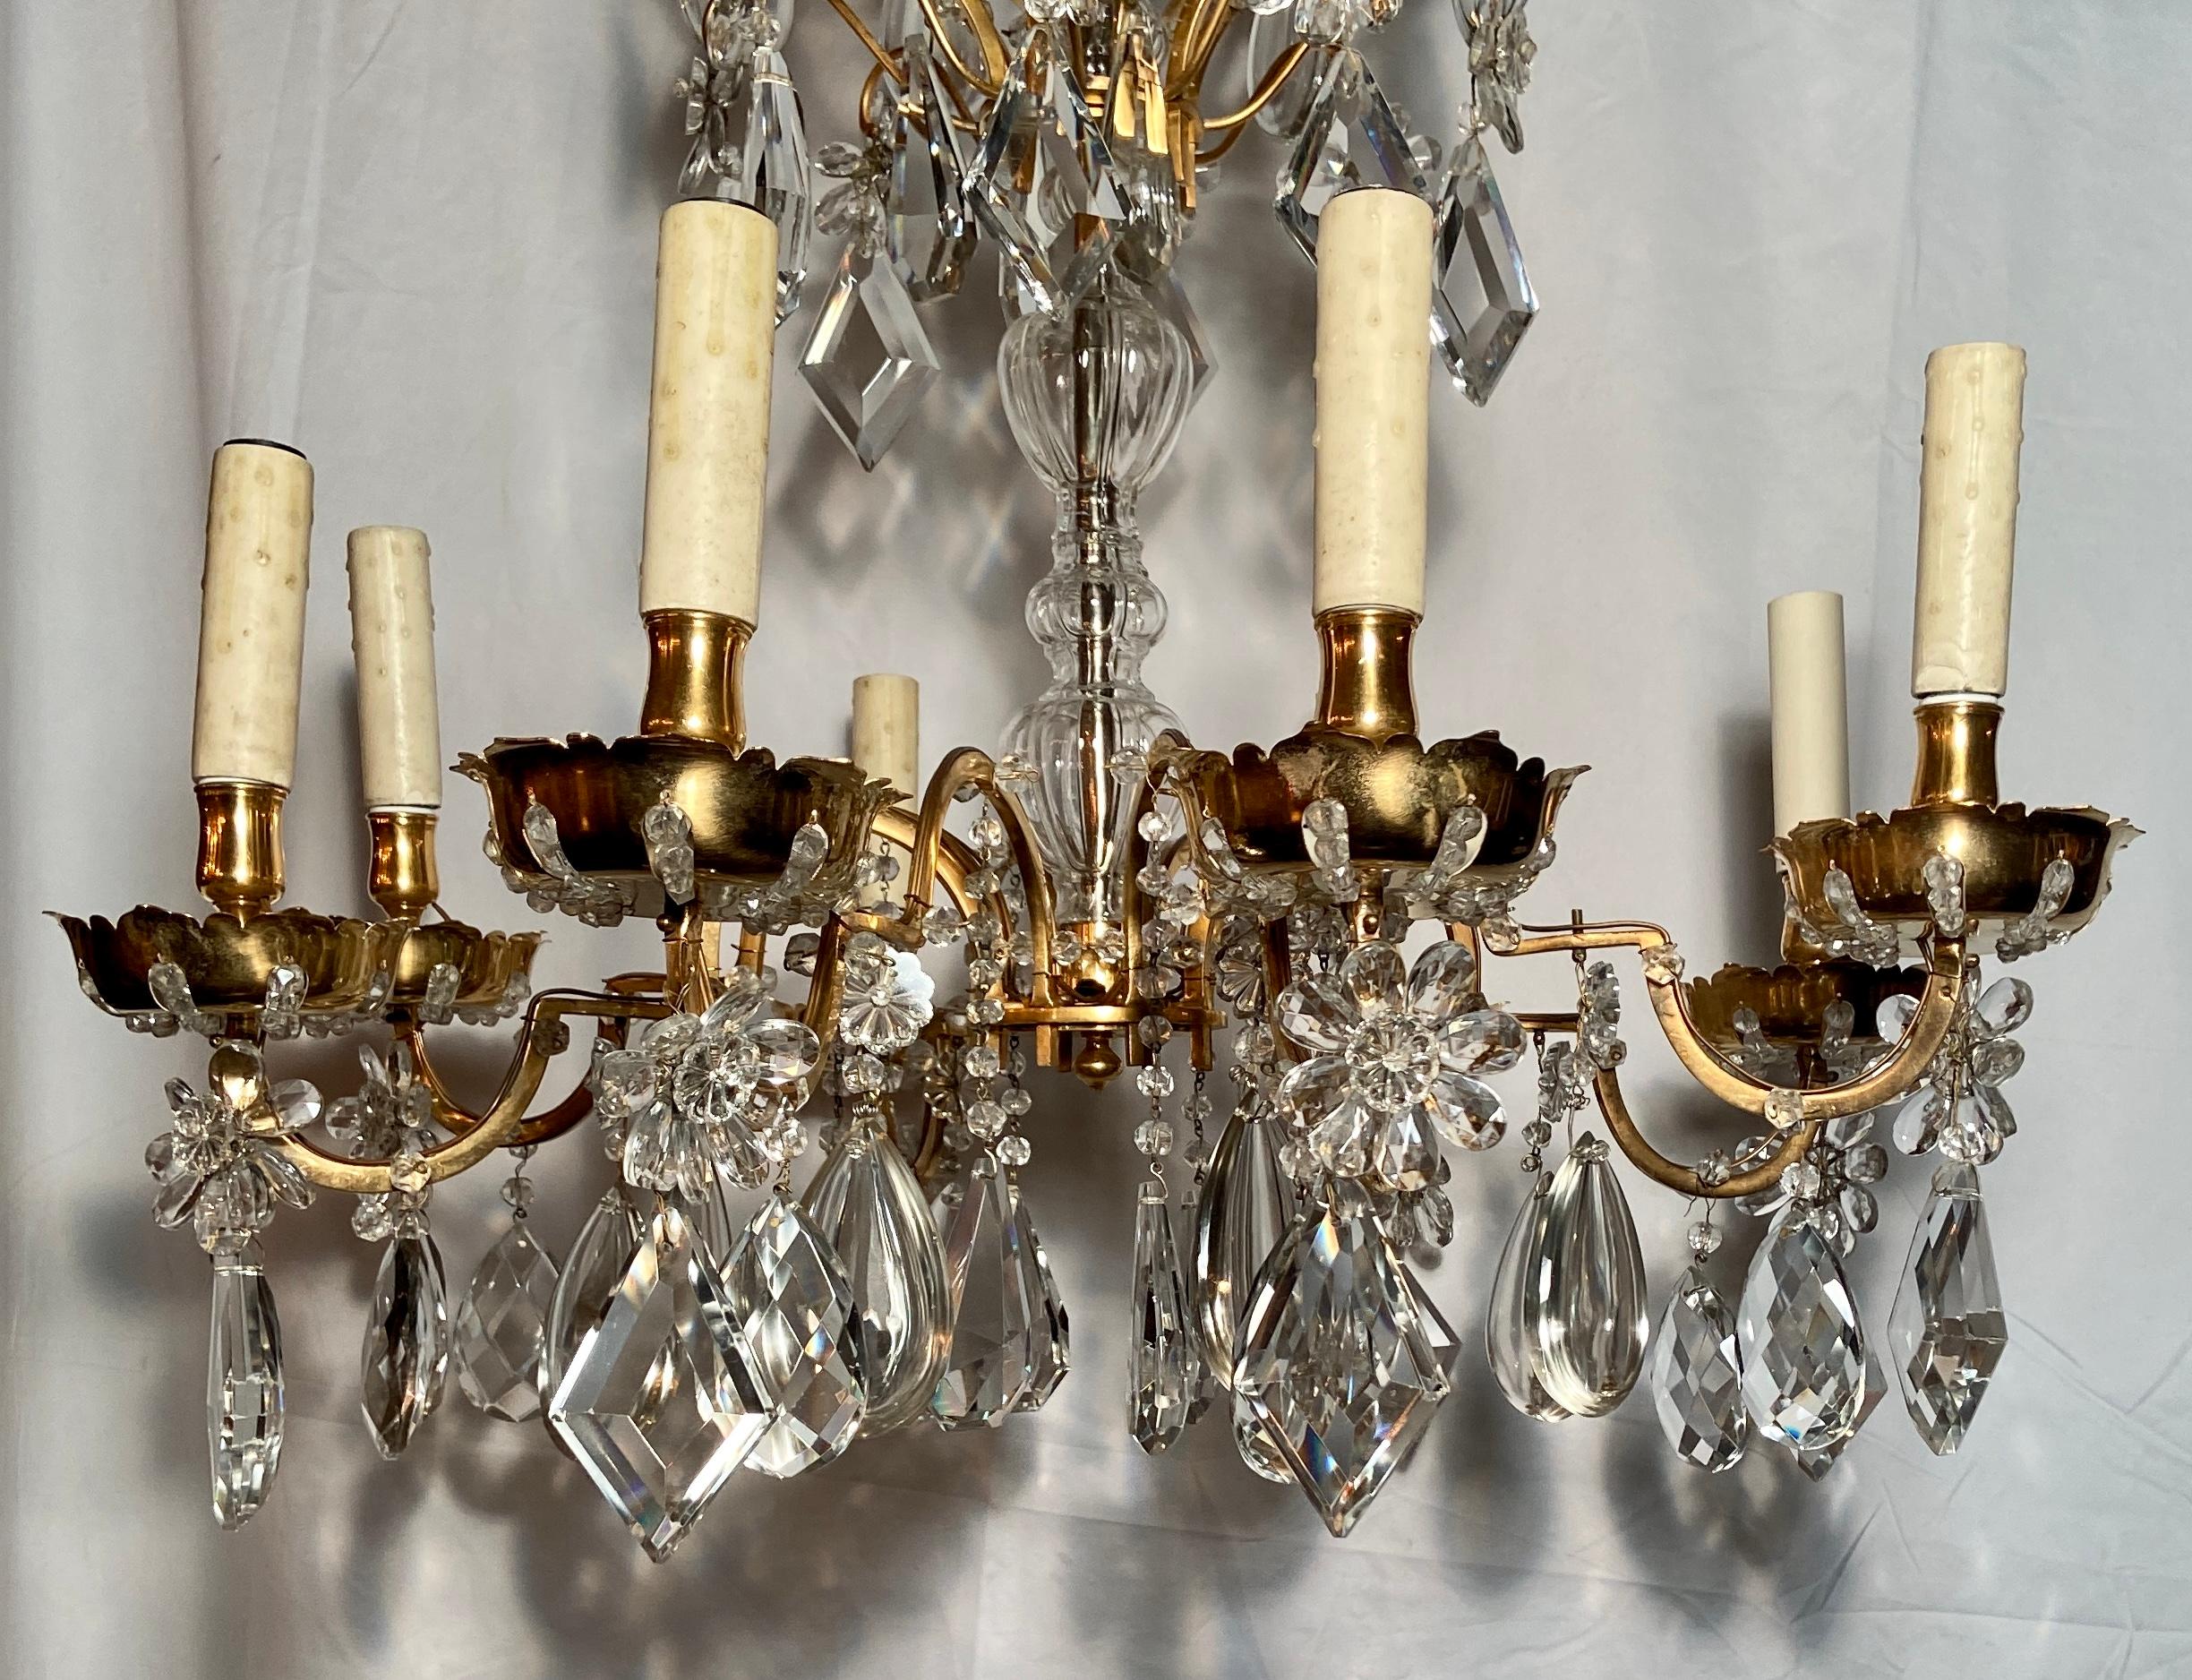 Antique French crystal bronze D'Ore chandelier, Circa 1910.
 